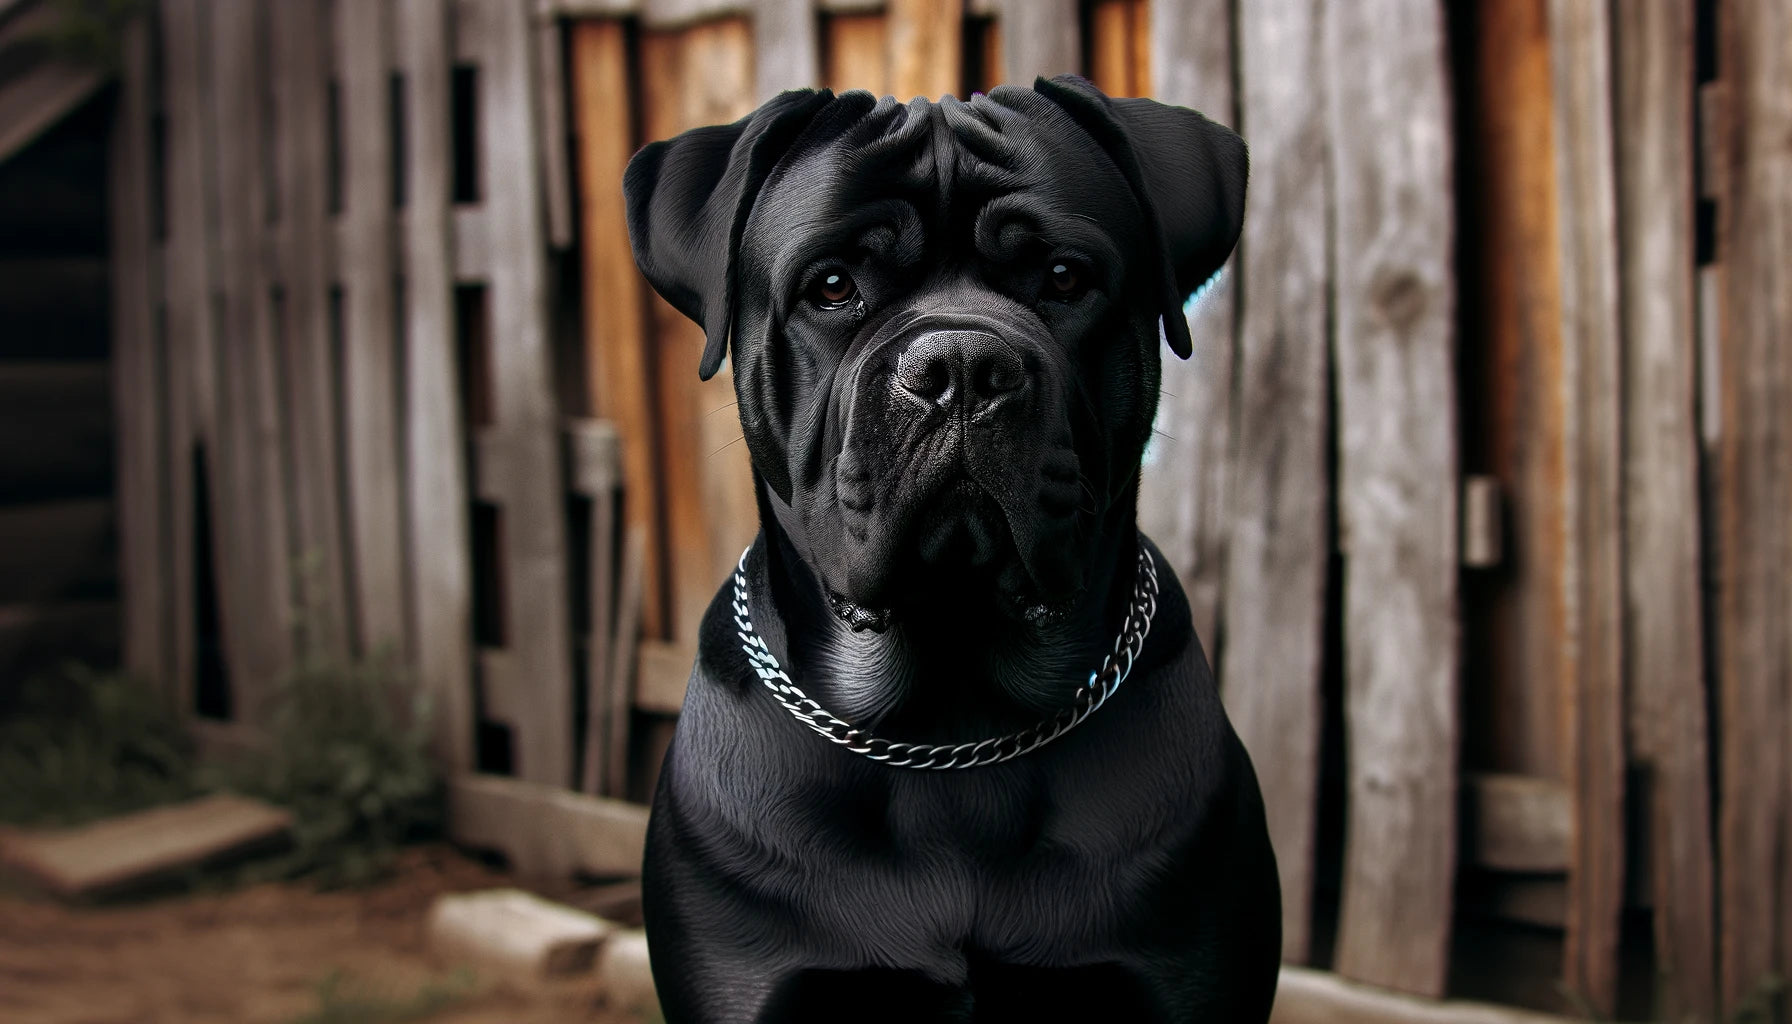 Full-body image of a black Cane Corso dog sitting upright in a wide frame